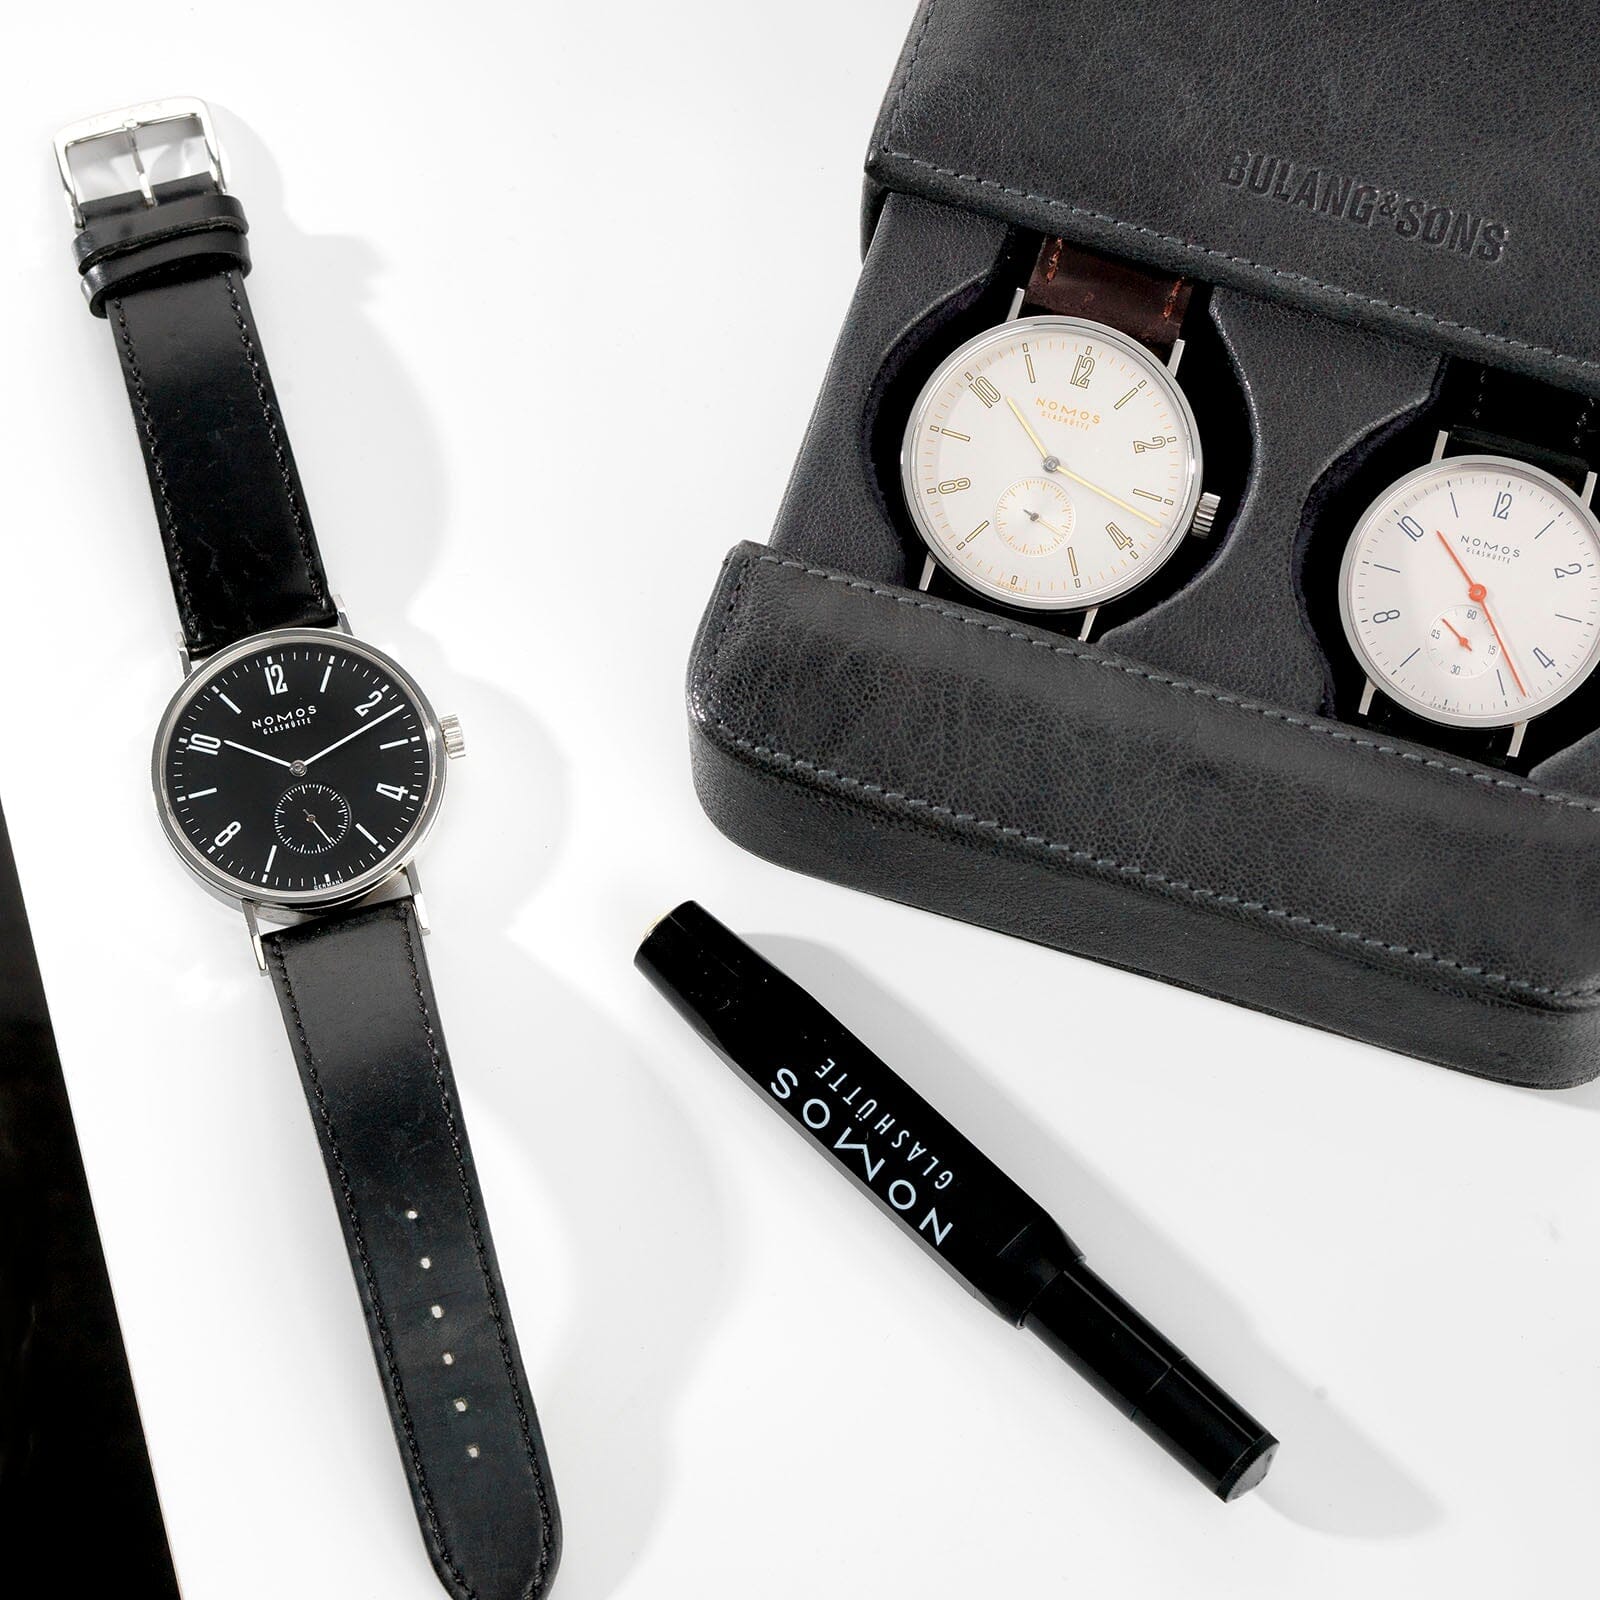 Modest and Sophisticated: Nomos Club Meeting at Bulang and Sons